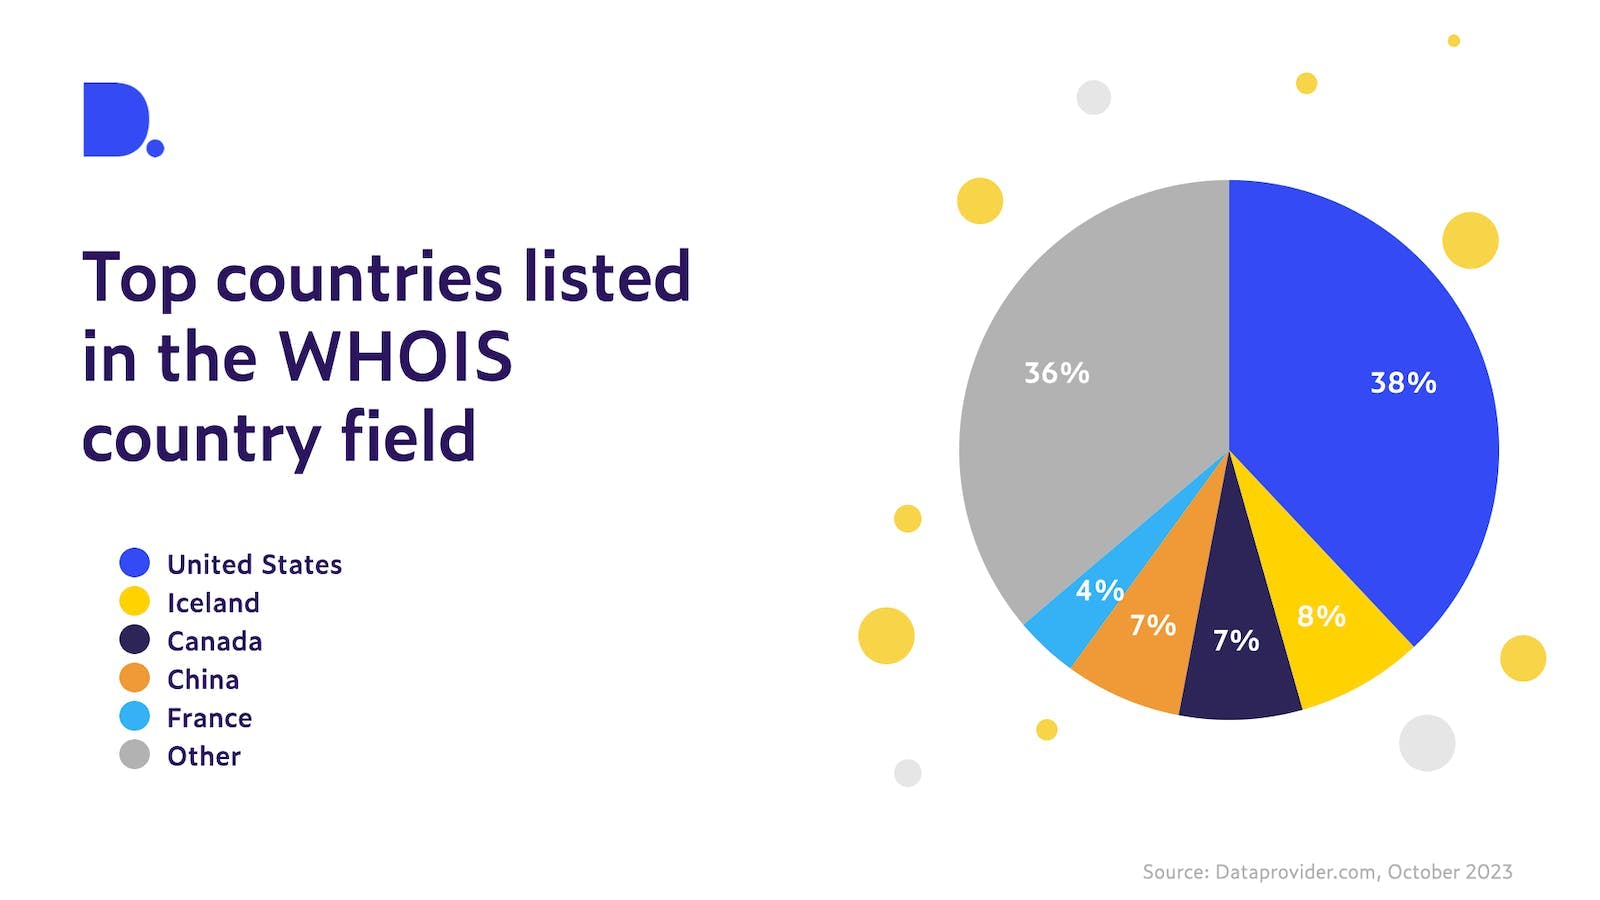 Pie chart showing the top 6 countries mentioned in the WHOIS Country field. The percantages are: US 38% / Iceland 8% / Canada 7% / China 7% / France 4% / Other 36%